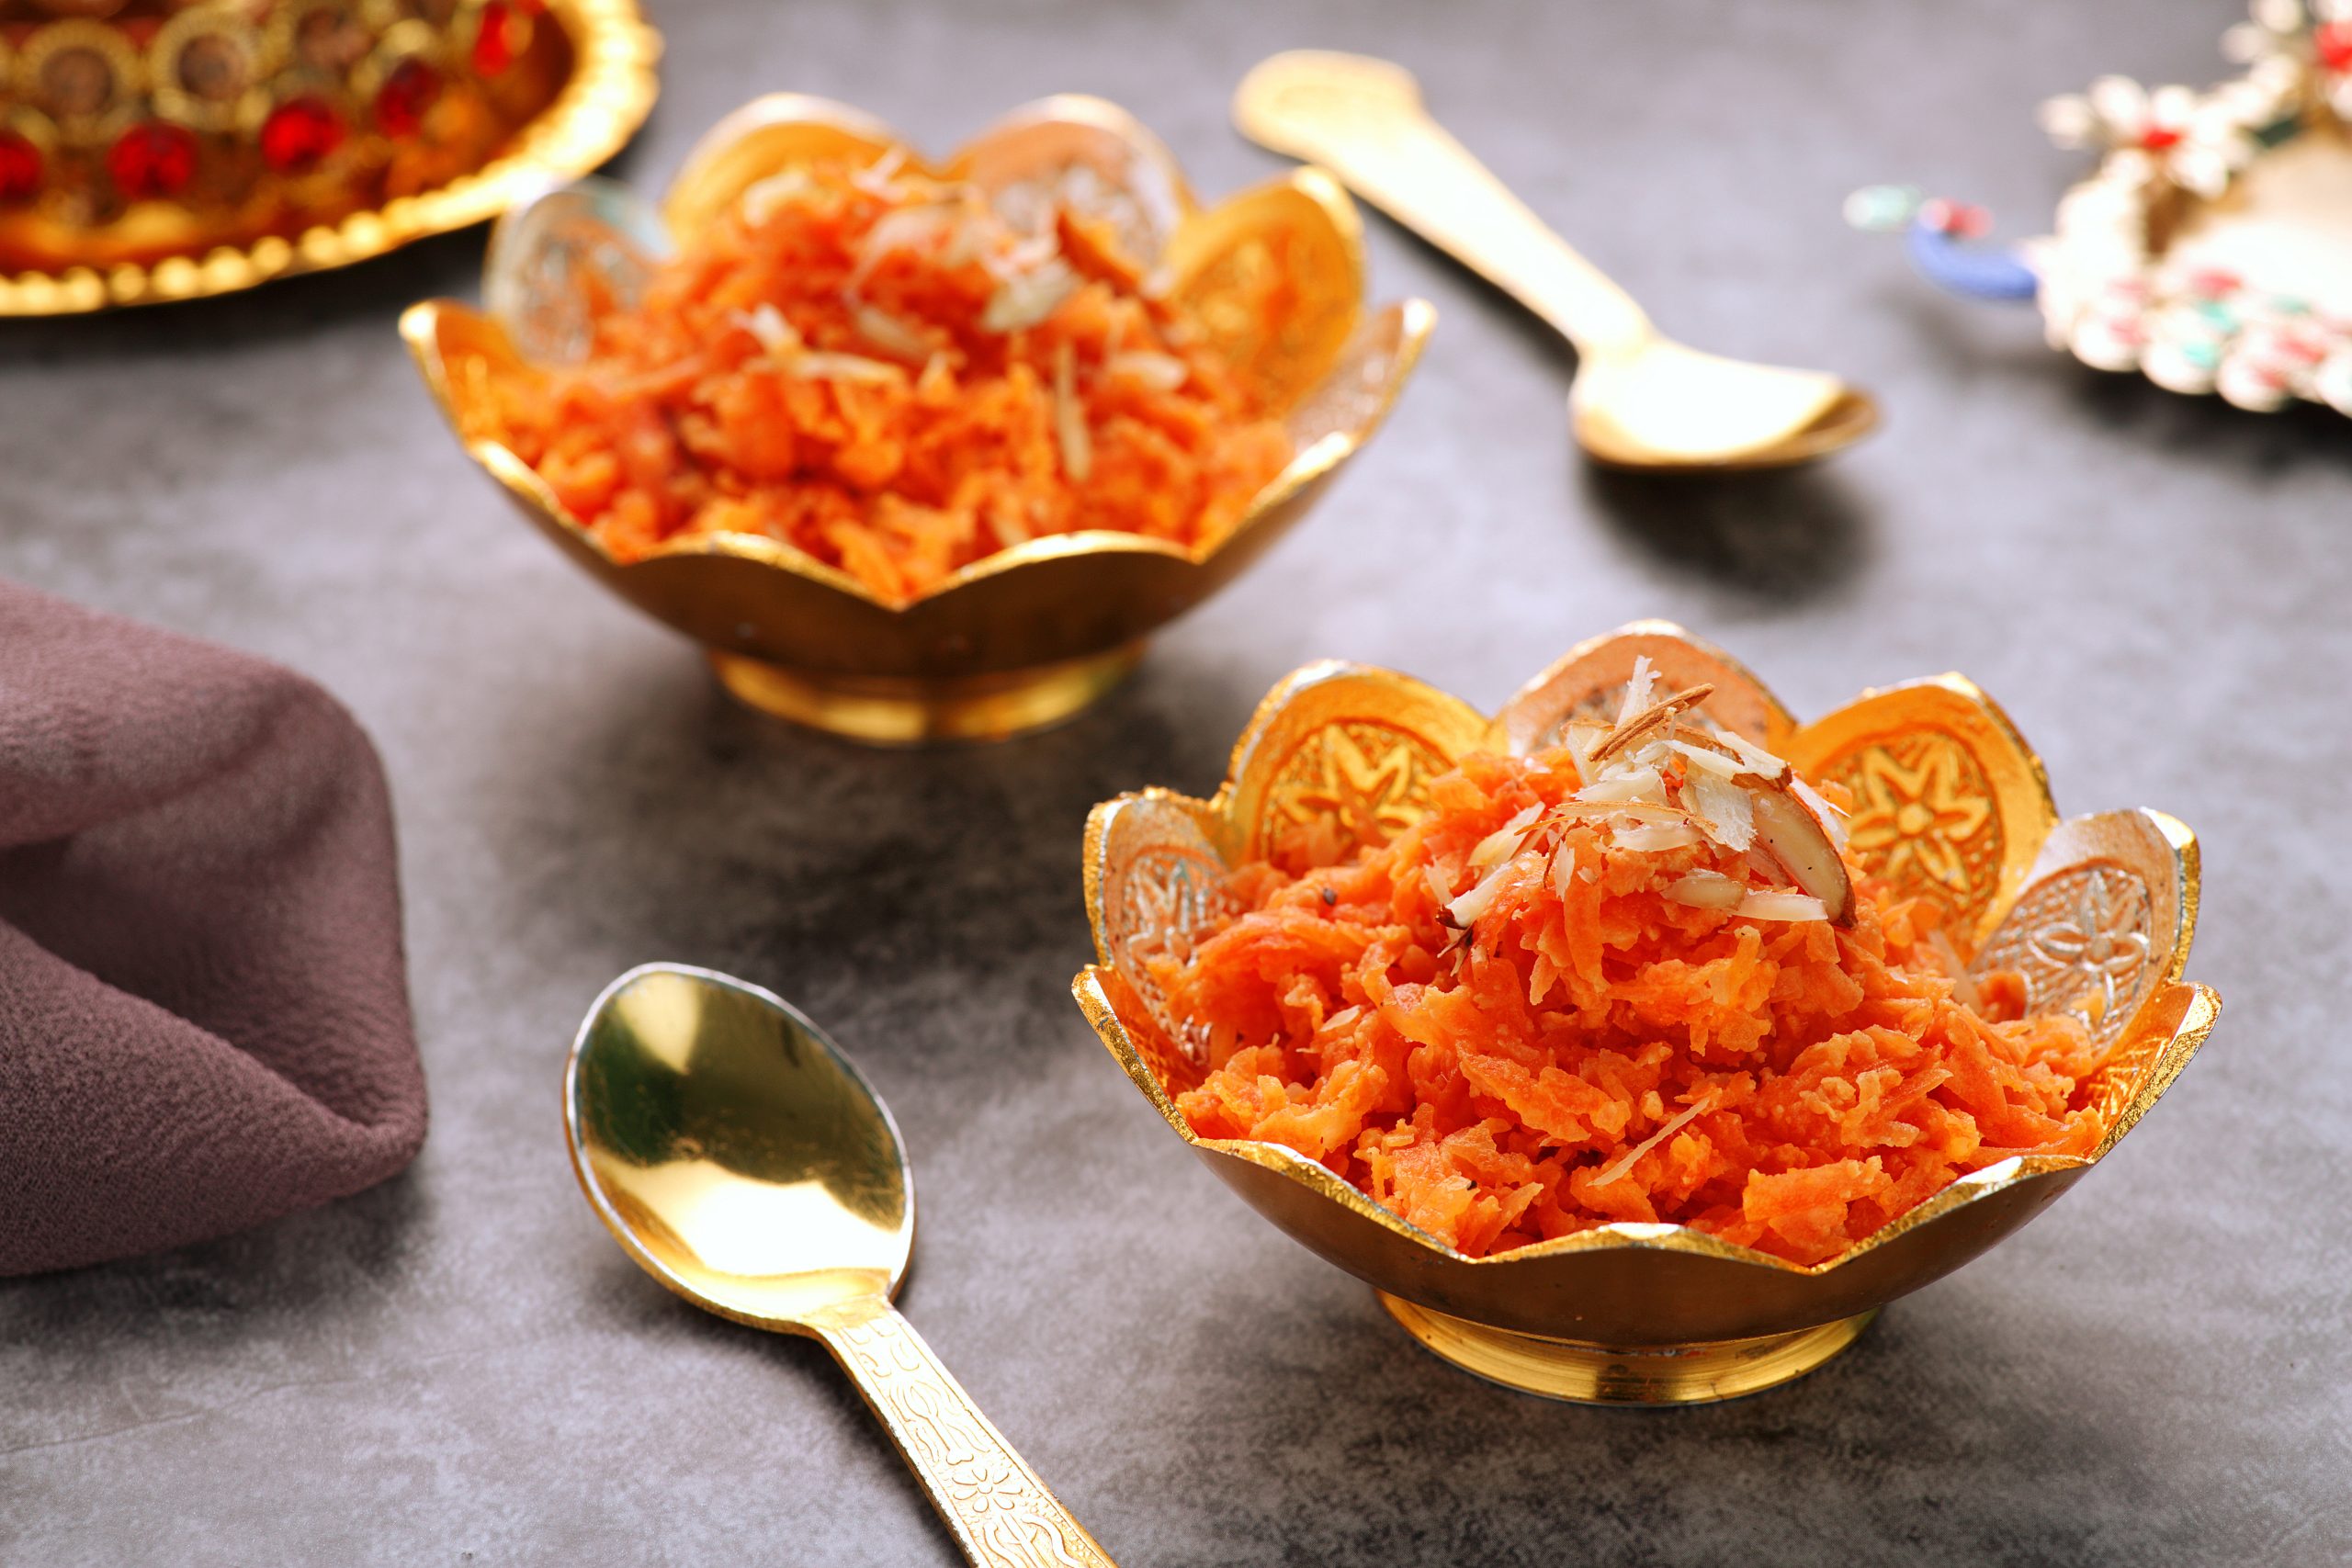 Picture of the Gajar ka Halwa pudding in golden bowls